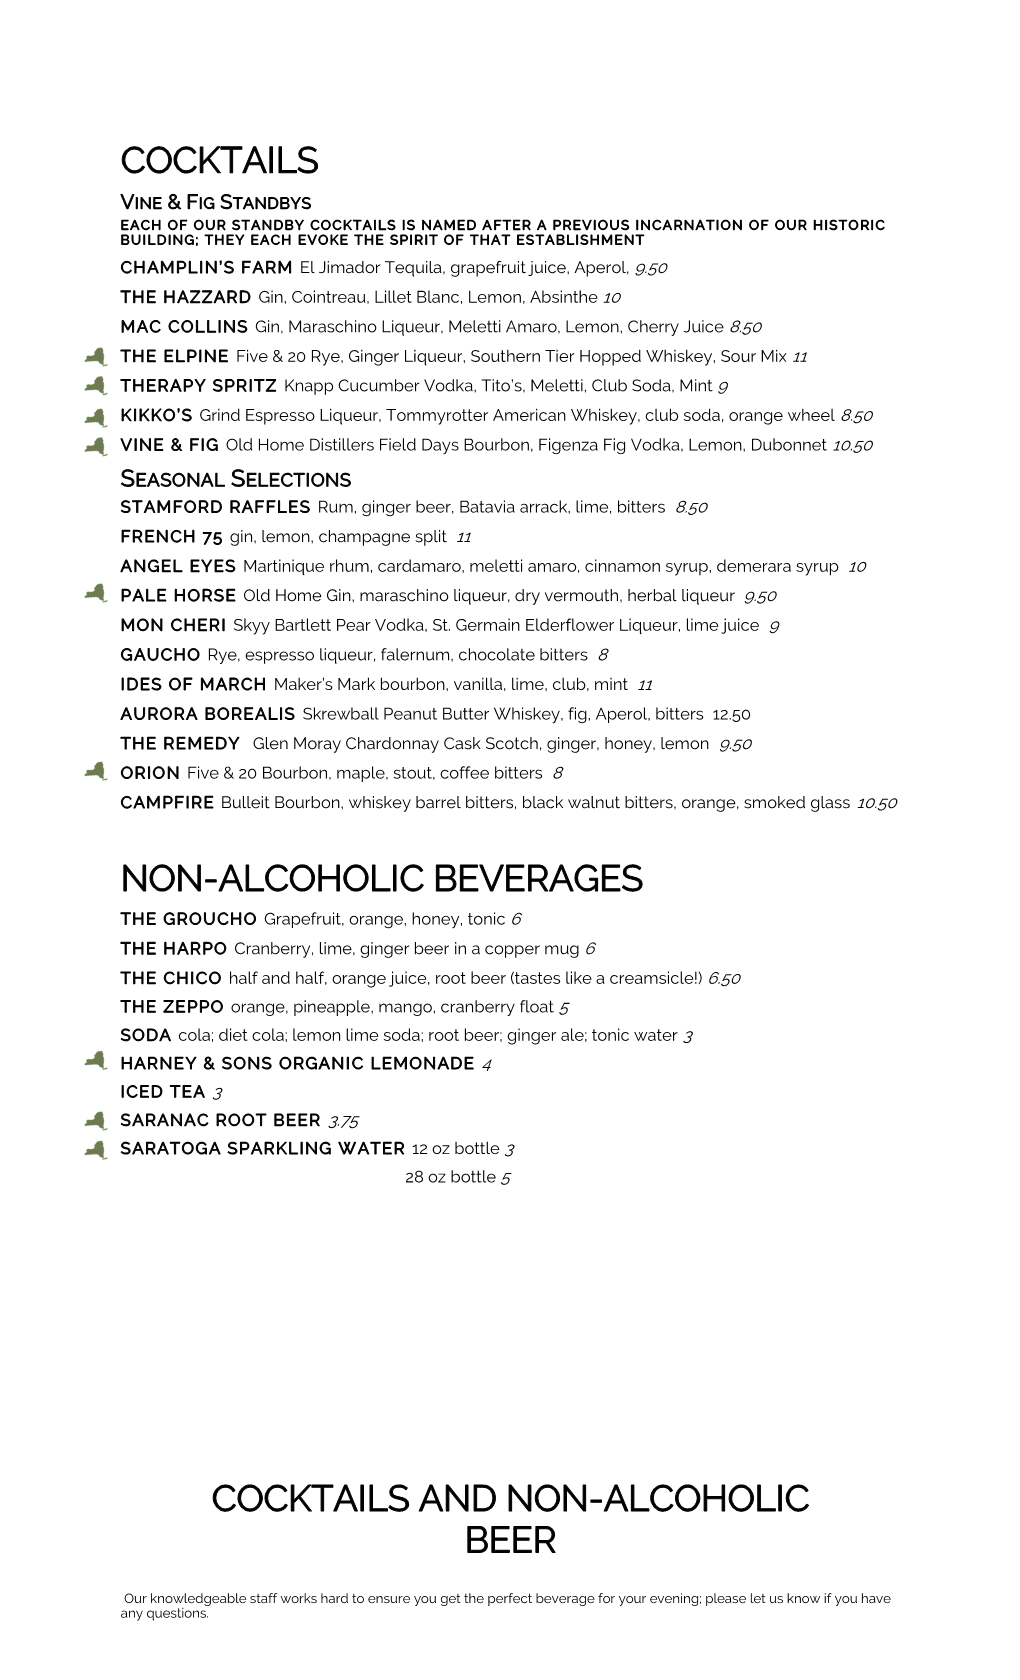 Cocktails Non-Alcoholic Beverages Beer